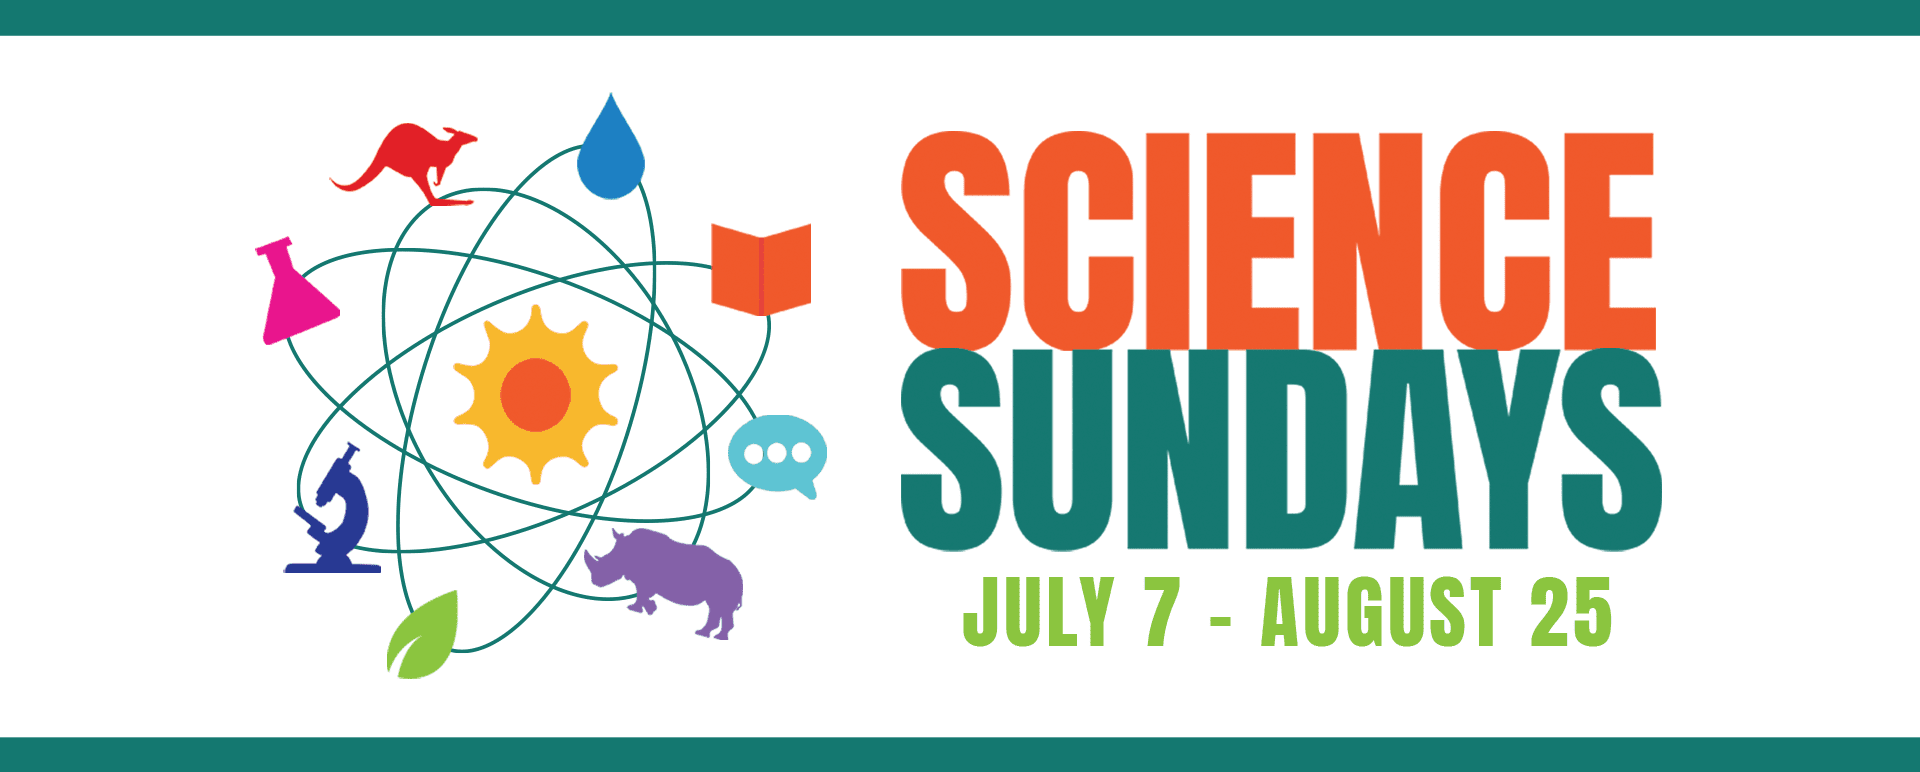 science sundays july 7 to august 25